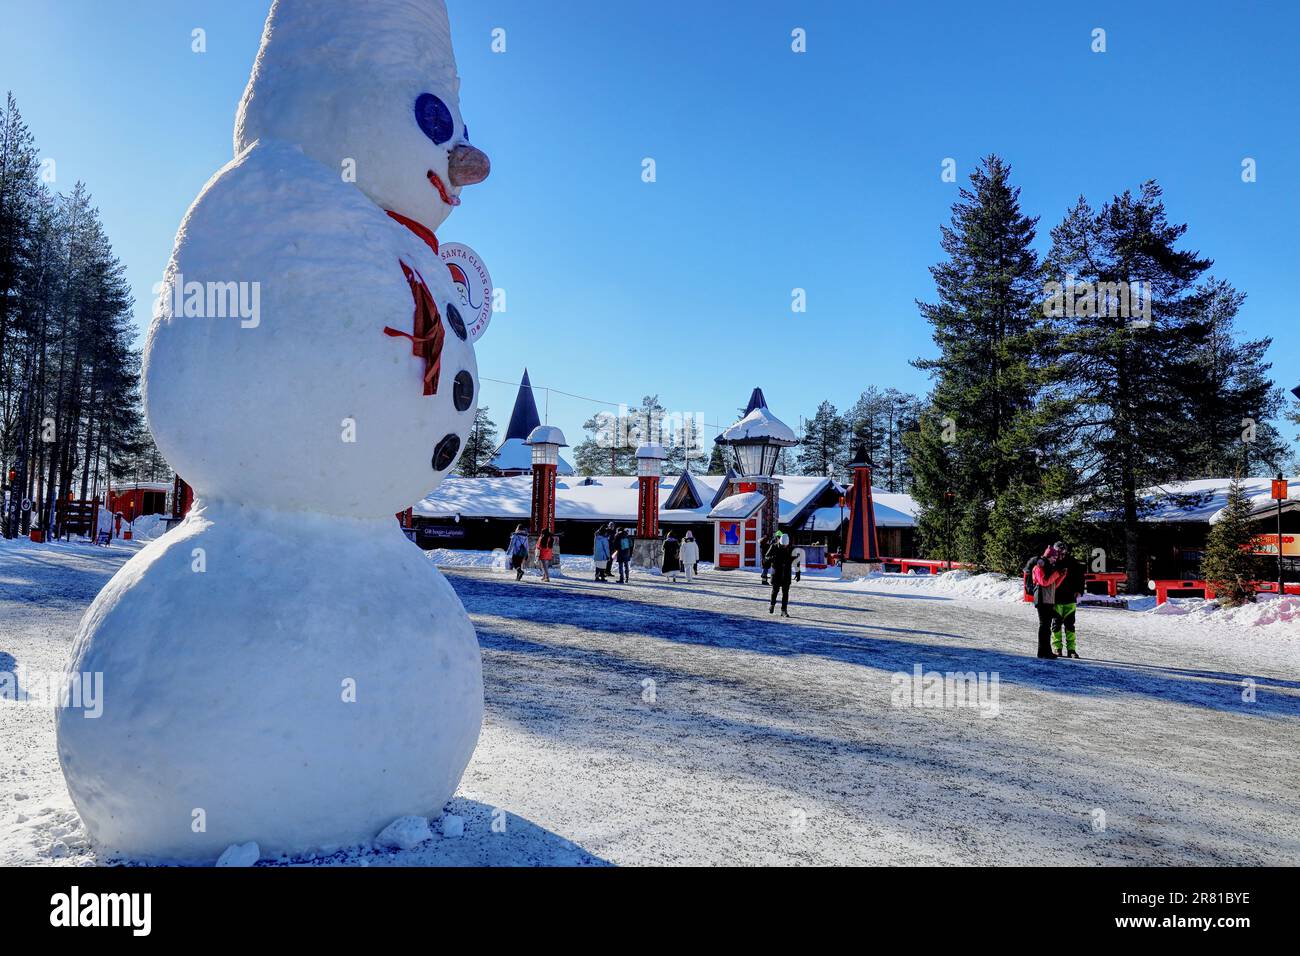 Santa Claus Village, Arctic Circle, Rovaniemi, Lapland, Finland - Winter scene with snow and giant snowman at the Father Christmas theme park Stock Photo